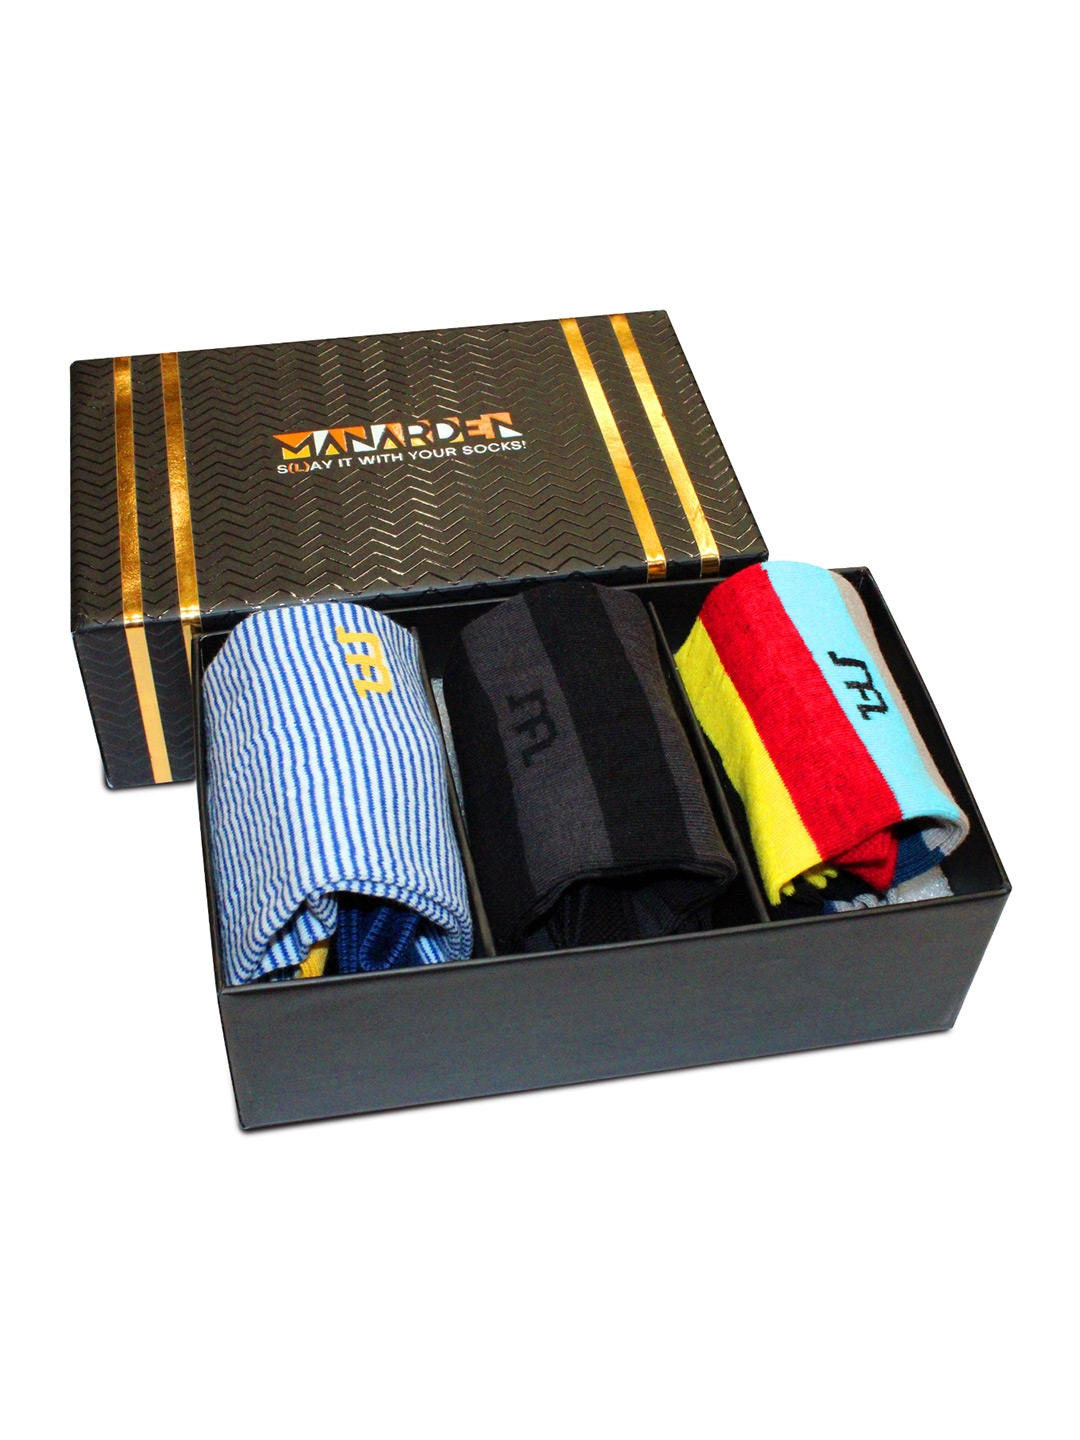 Buy Men's Modal Luxury Dress Socks Soft and Comfortable Online in India 